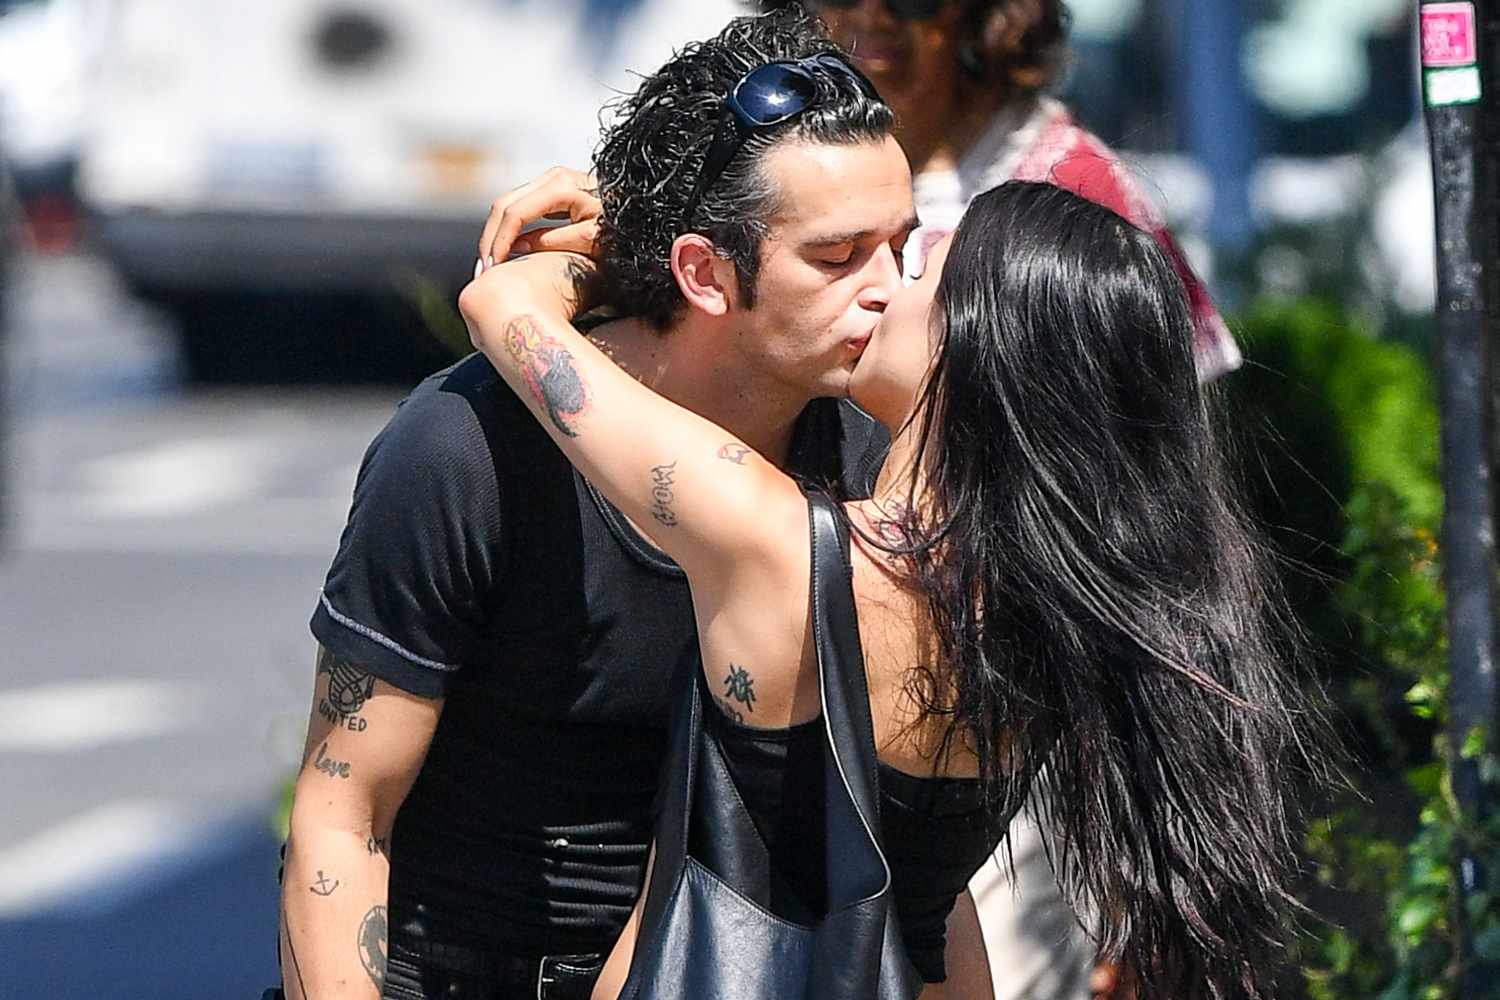 Matt Healy and model Gabbriette Bechtel have a PDA filled outing in New York City